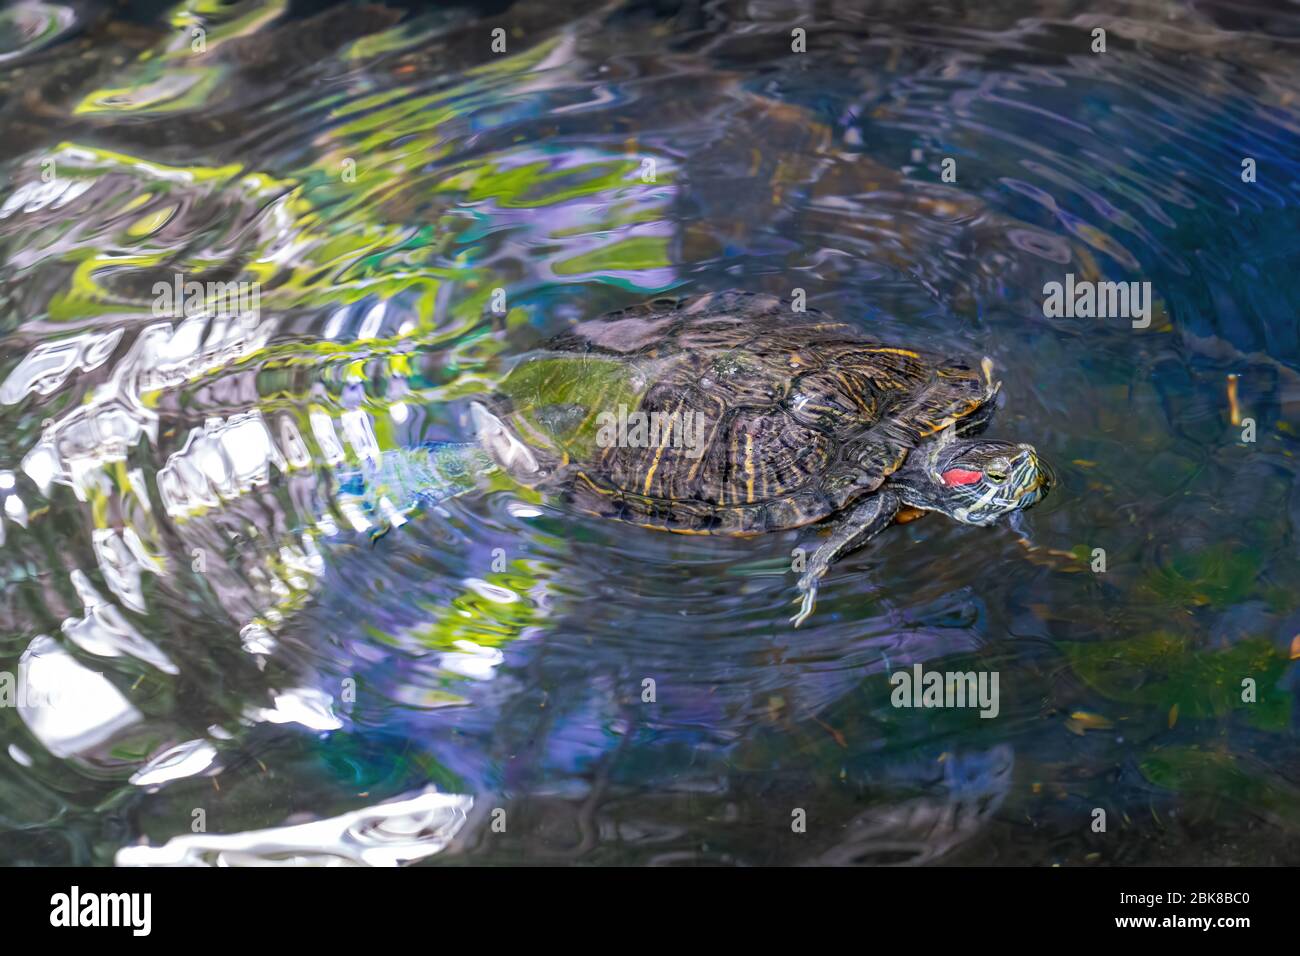 A red-cheeked turtle swims in the water Stock Photo